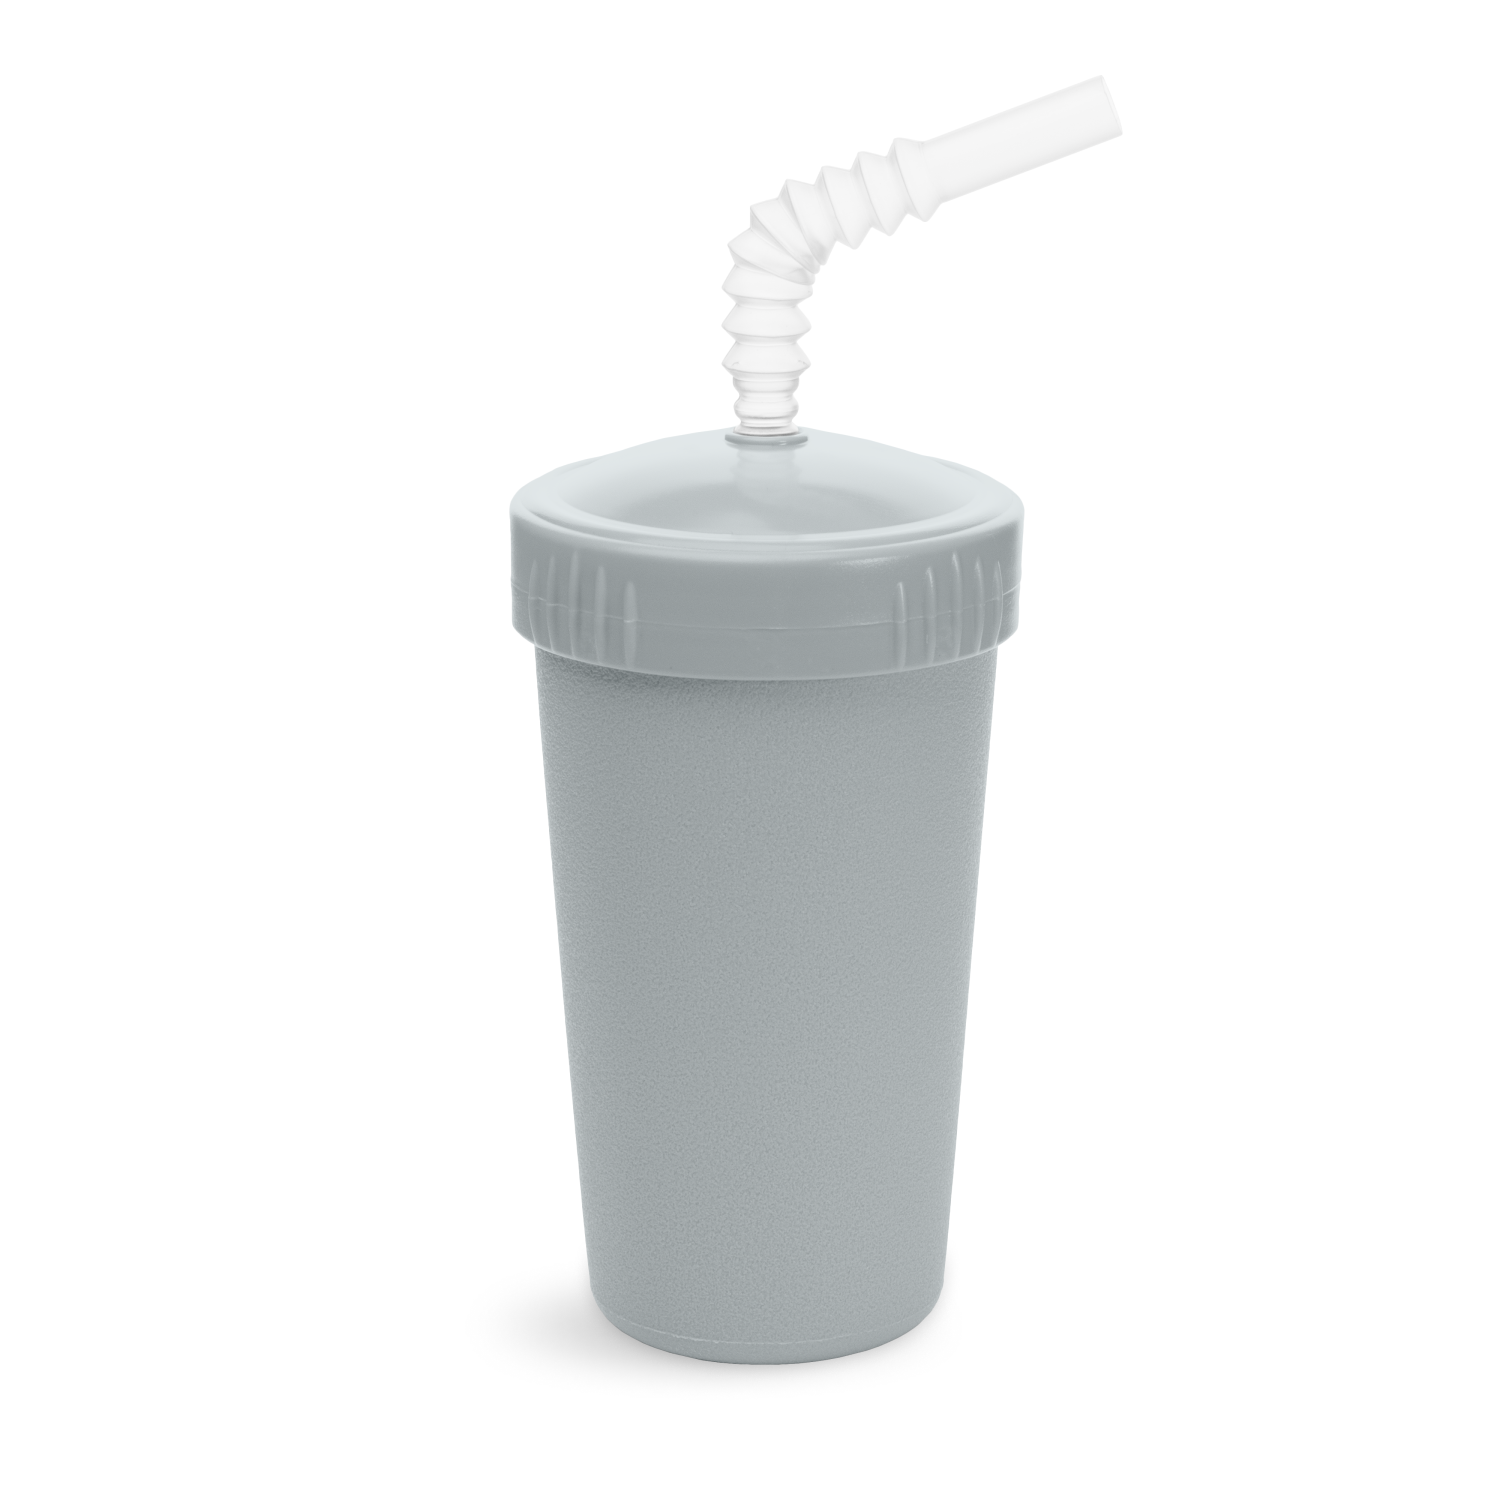 Re Play Made in USA 10 Oz. Straw Cups for Toddlers, Pack of 3 - Reusable  Kids Cups with Straws and L…See more Re Play Made in USA 10 Oz. Straw Cups